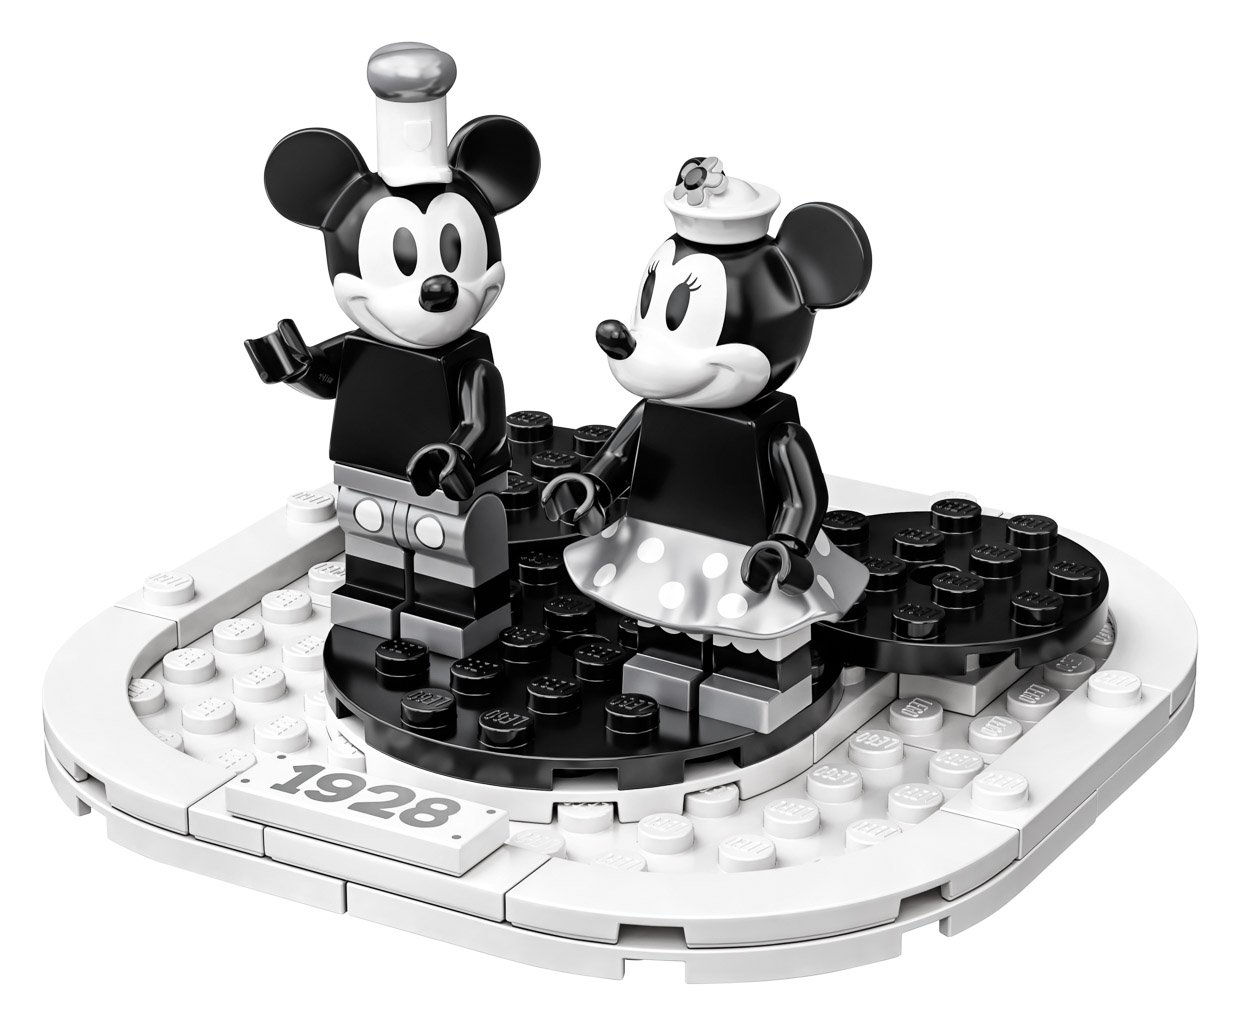 LEGO Steamboat Willie